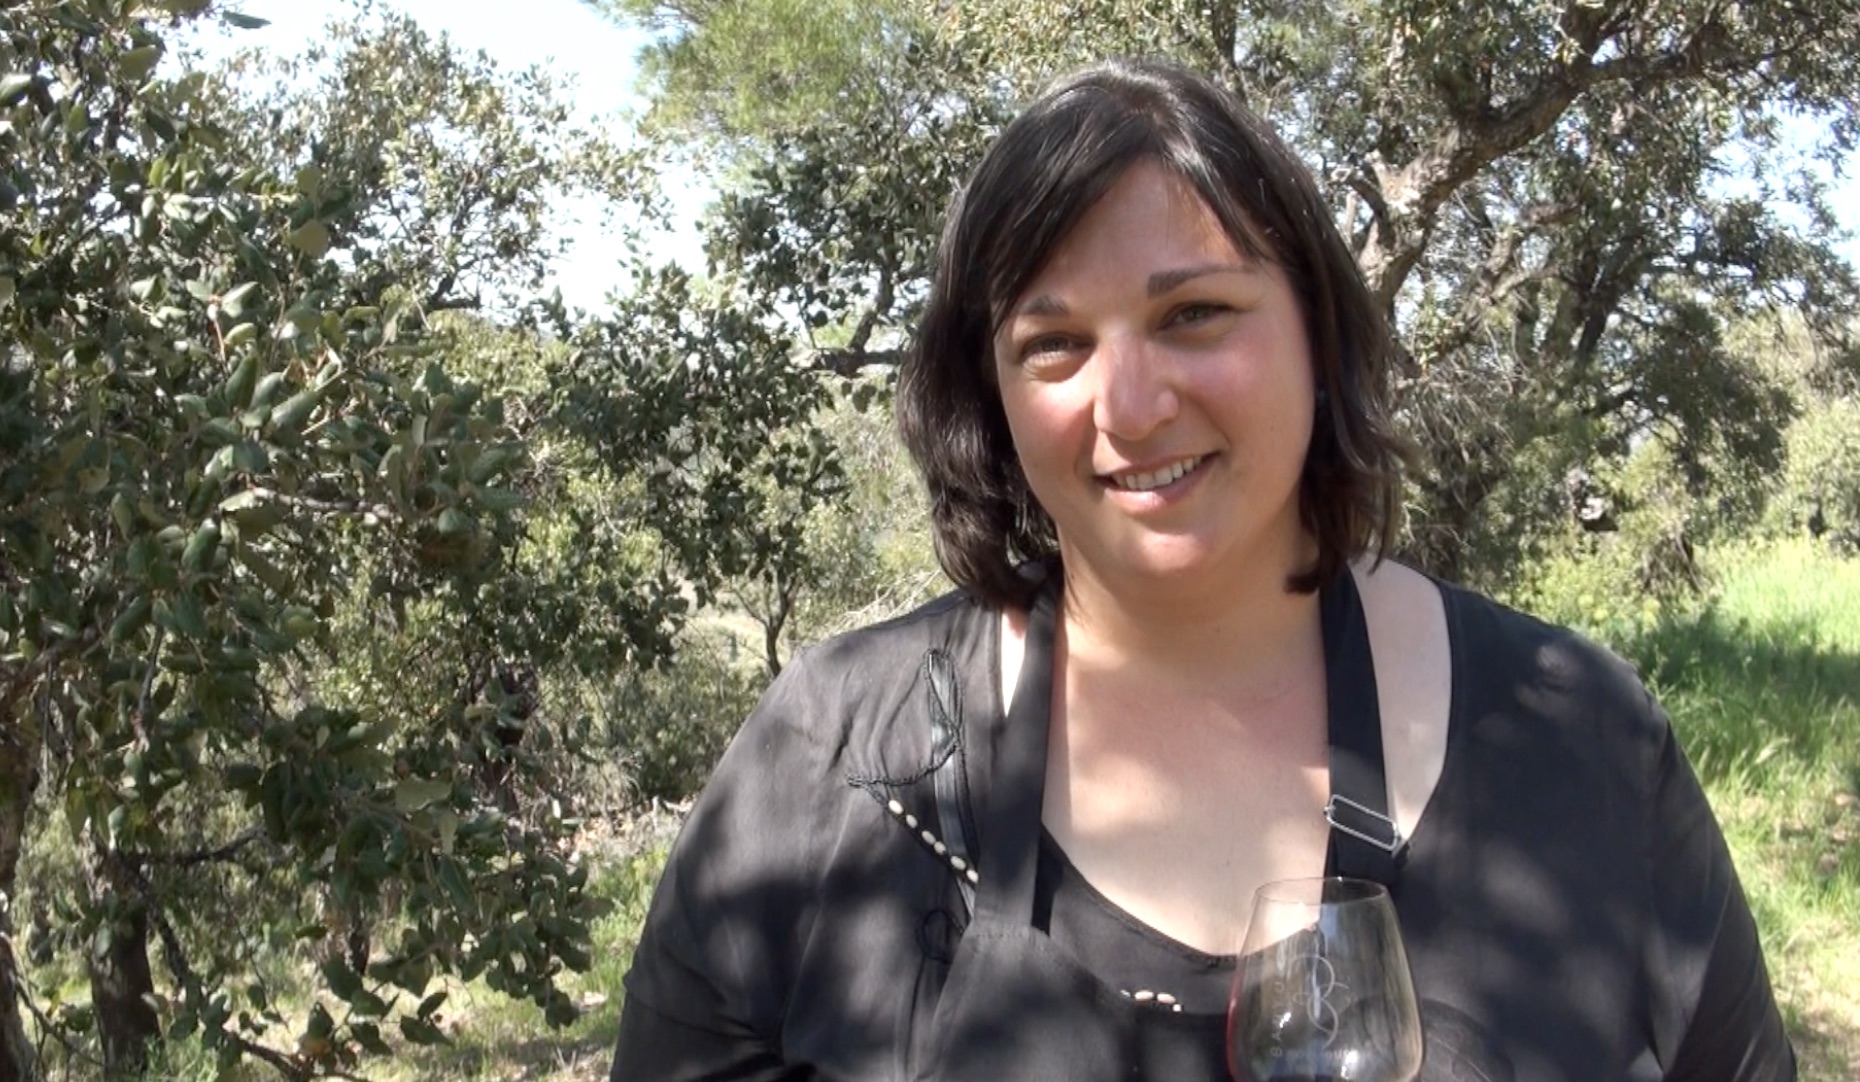 Elise Gaillard encourages you to look at buying up some of the old , abandoned vineyards in the SW of France.